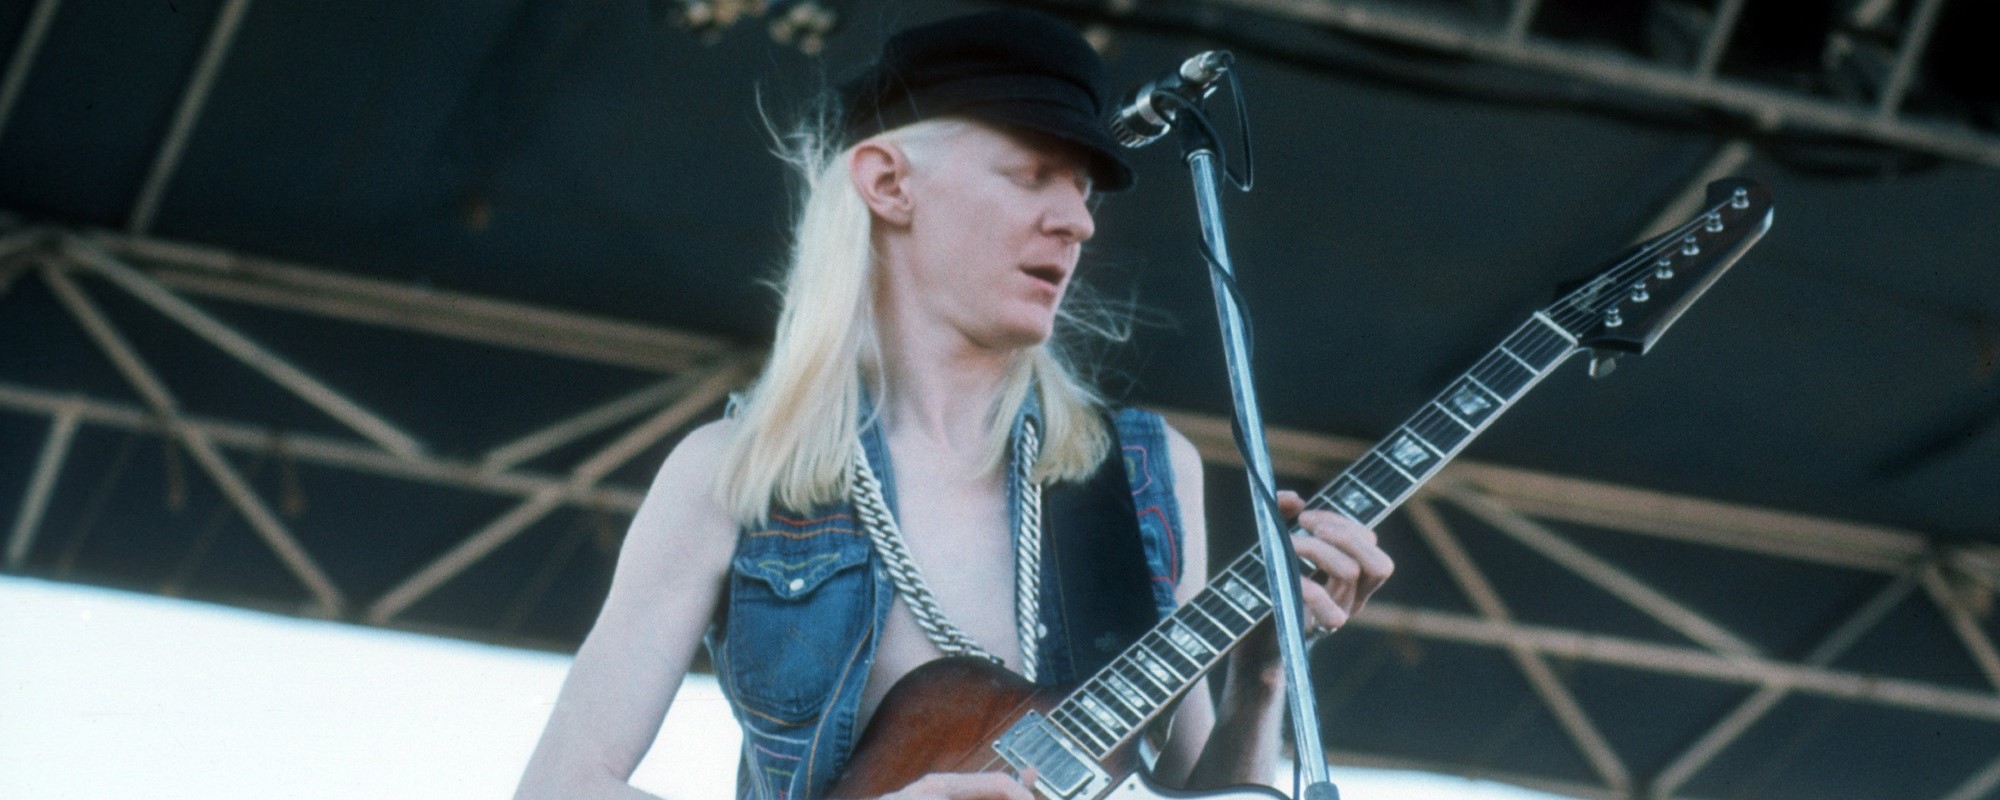 In Memory Of Blues Great Johnny Winter: 5 Must-Listen to Collabs With Jimi Hendrix & More